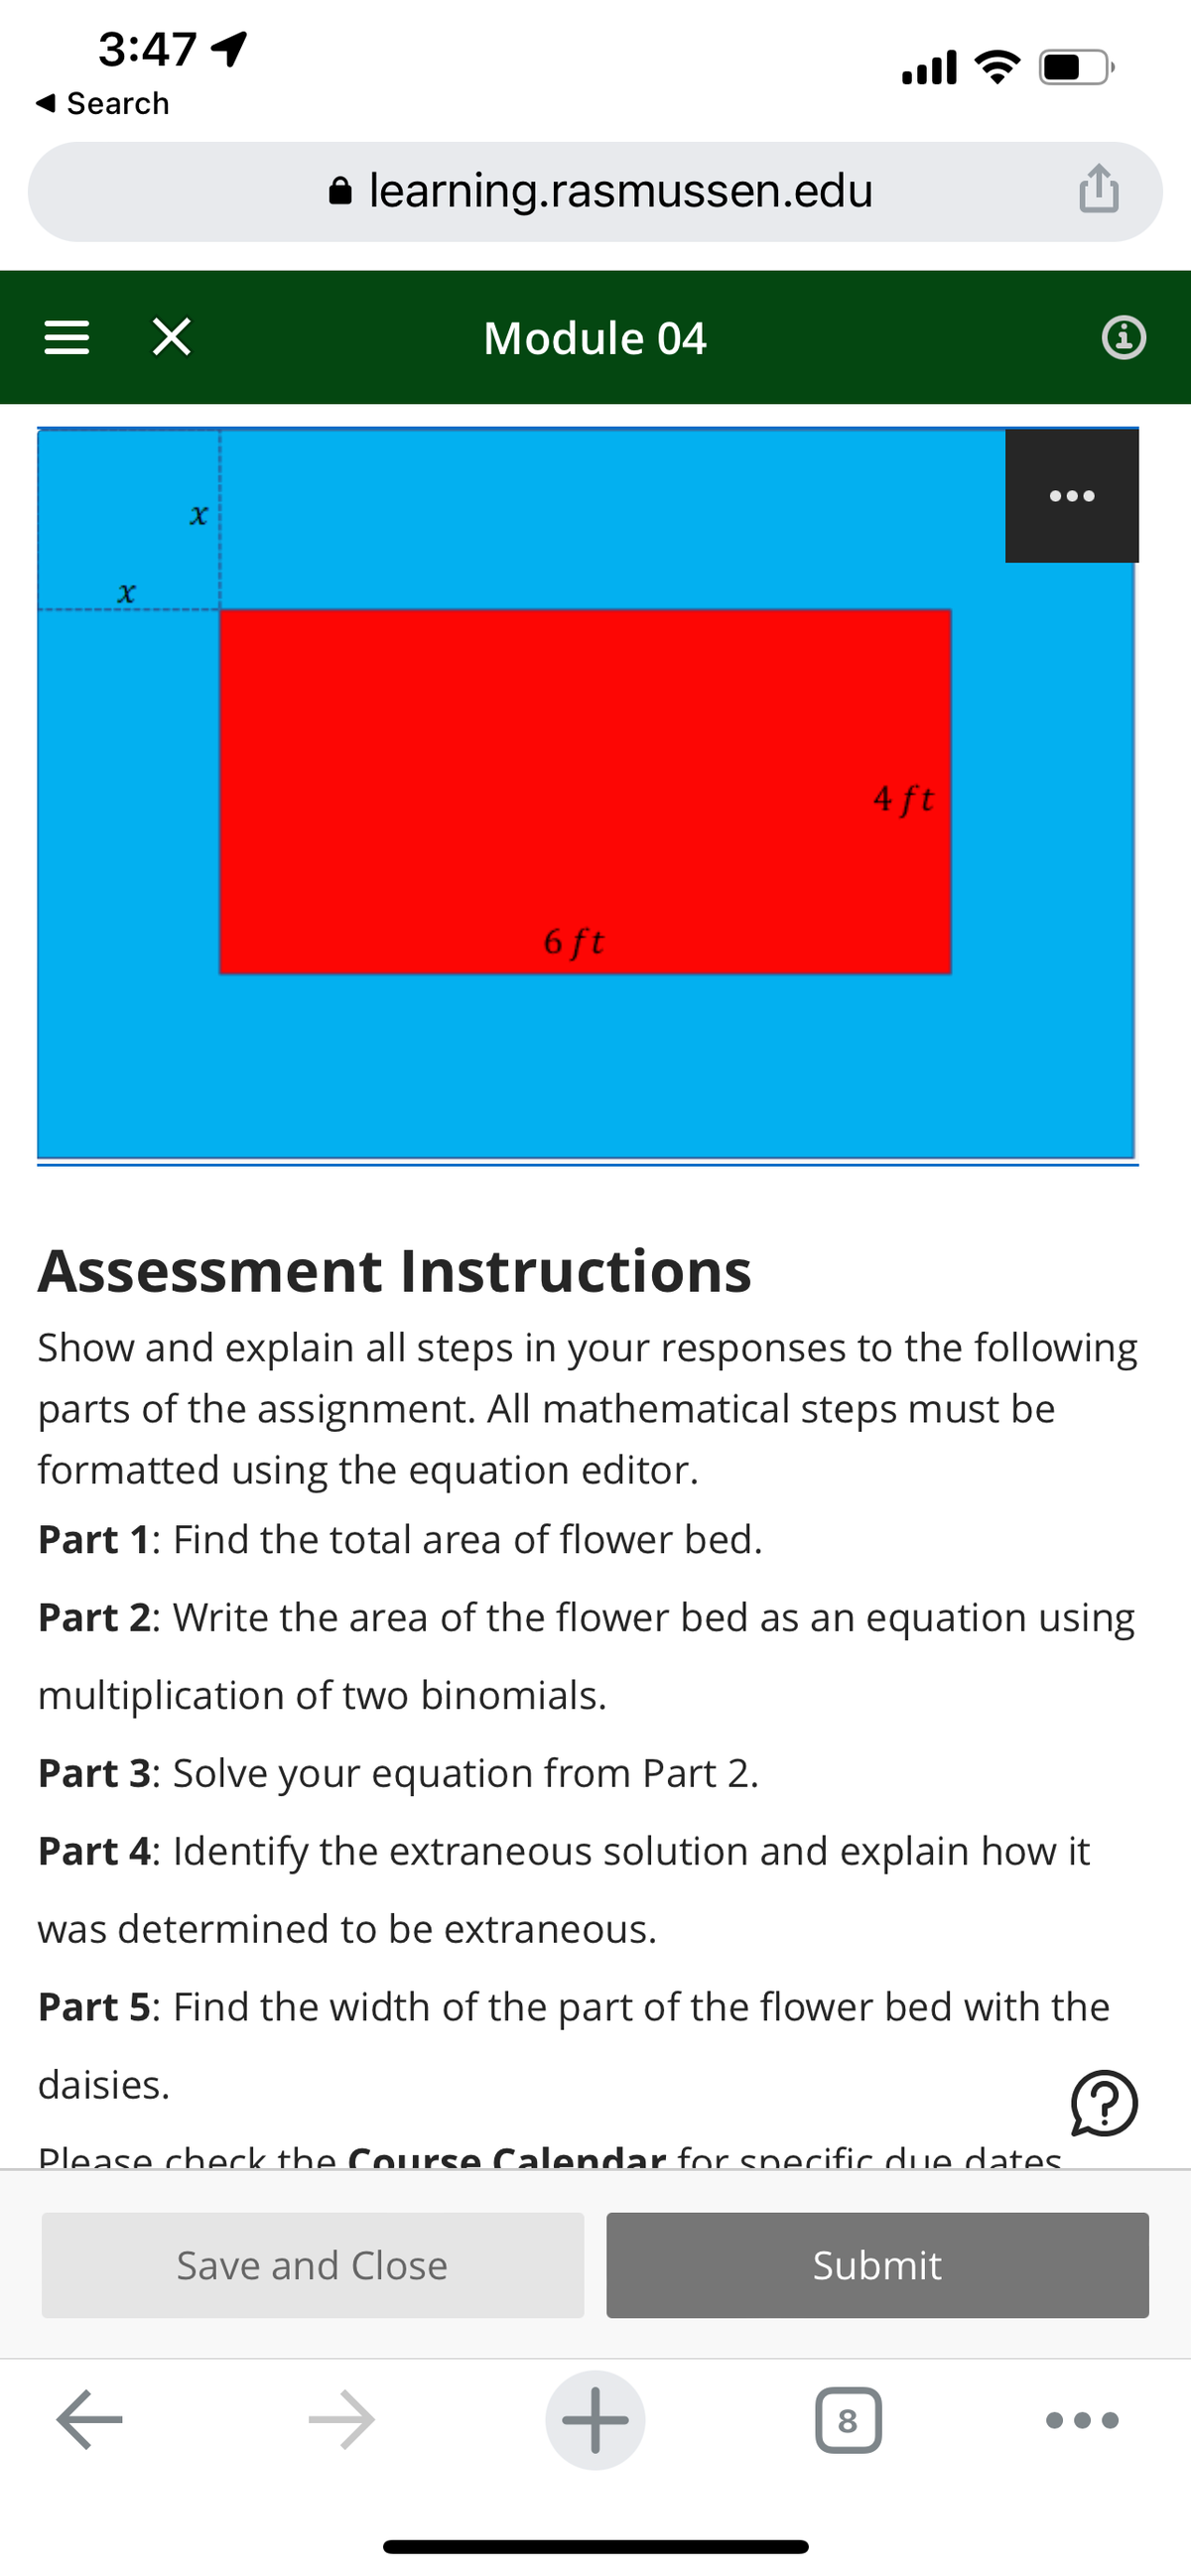 3:47 1
Search
=
X
×
X
learning.rasmussen.edu
Module 04
6 ft
Save and Close
....
4 ft
Assessment Instructions
Show and explain all steps in your responses to the following
parts of the assignment. All mathematical steps must be
formatted using the equation editor.
Part 1: Find the total area of flower bed.
+
Part 2: Write the area of the flower bed as an equation using
multiplication of two binomials.
Part 3: Solve your equation from Part 2.
Part 4: Identify the extraneous solution and explain how it
was determined to be extraneous.
Part 5: Find the width of the part of the flower bed with the
daisies.
Ⓒ
Please check the Course Calendar for specific due dates.
چ
8
Submit
i